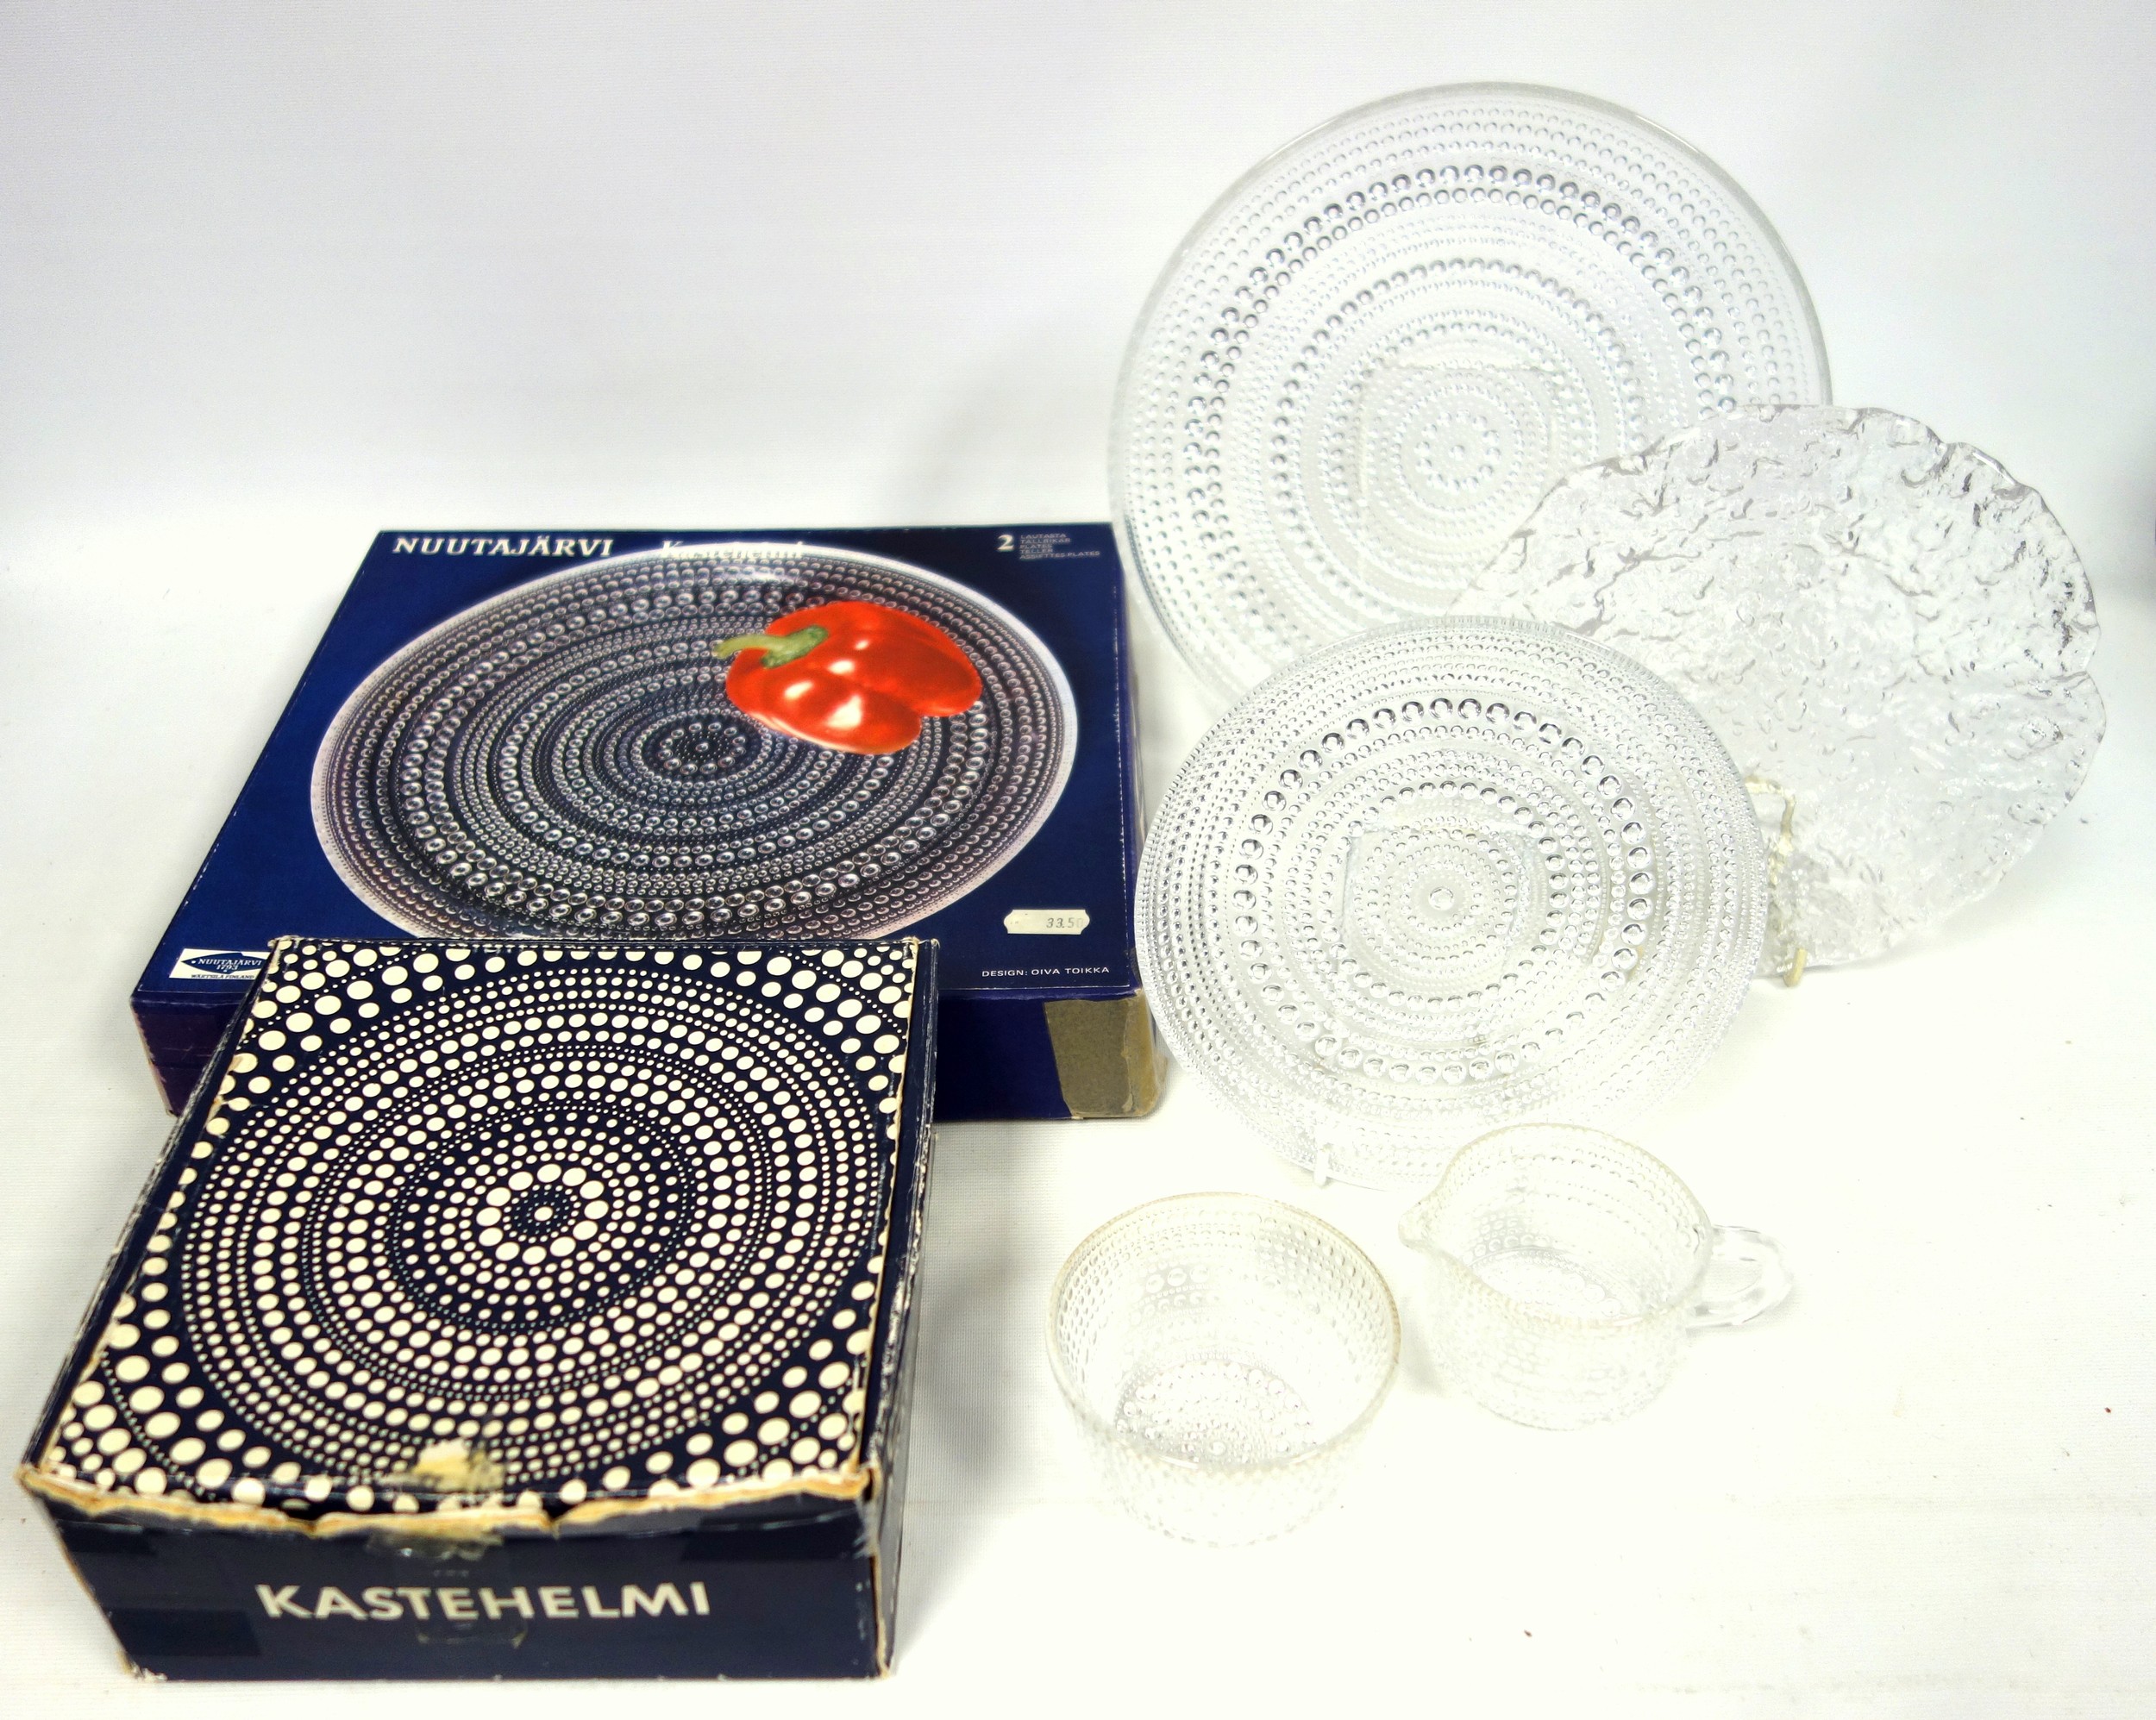 'Kastehelmi' (Dewdrop) design clear glass, set of 6 small plates (boxed) by Oiva Toikka for